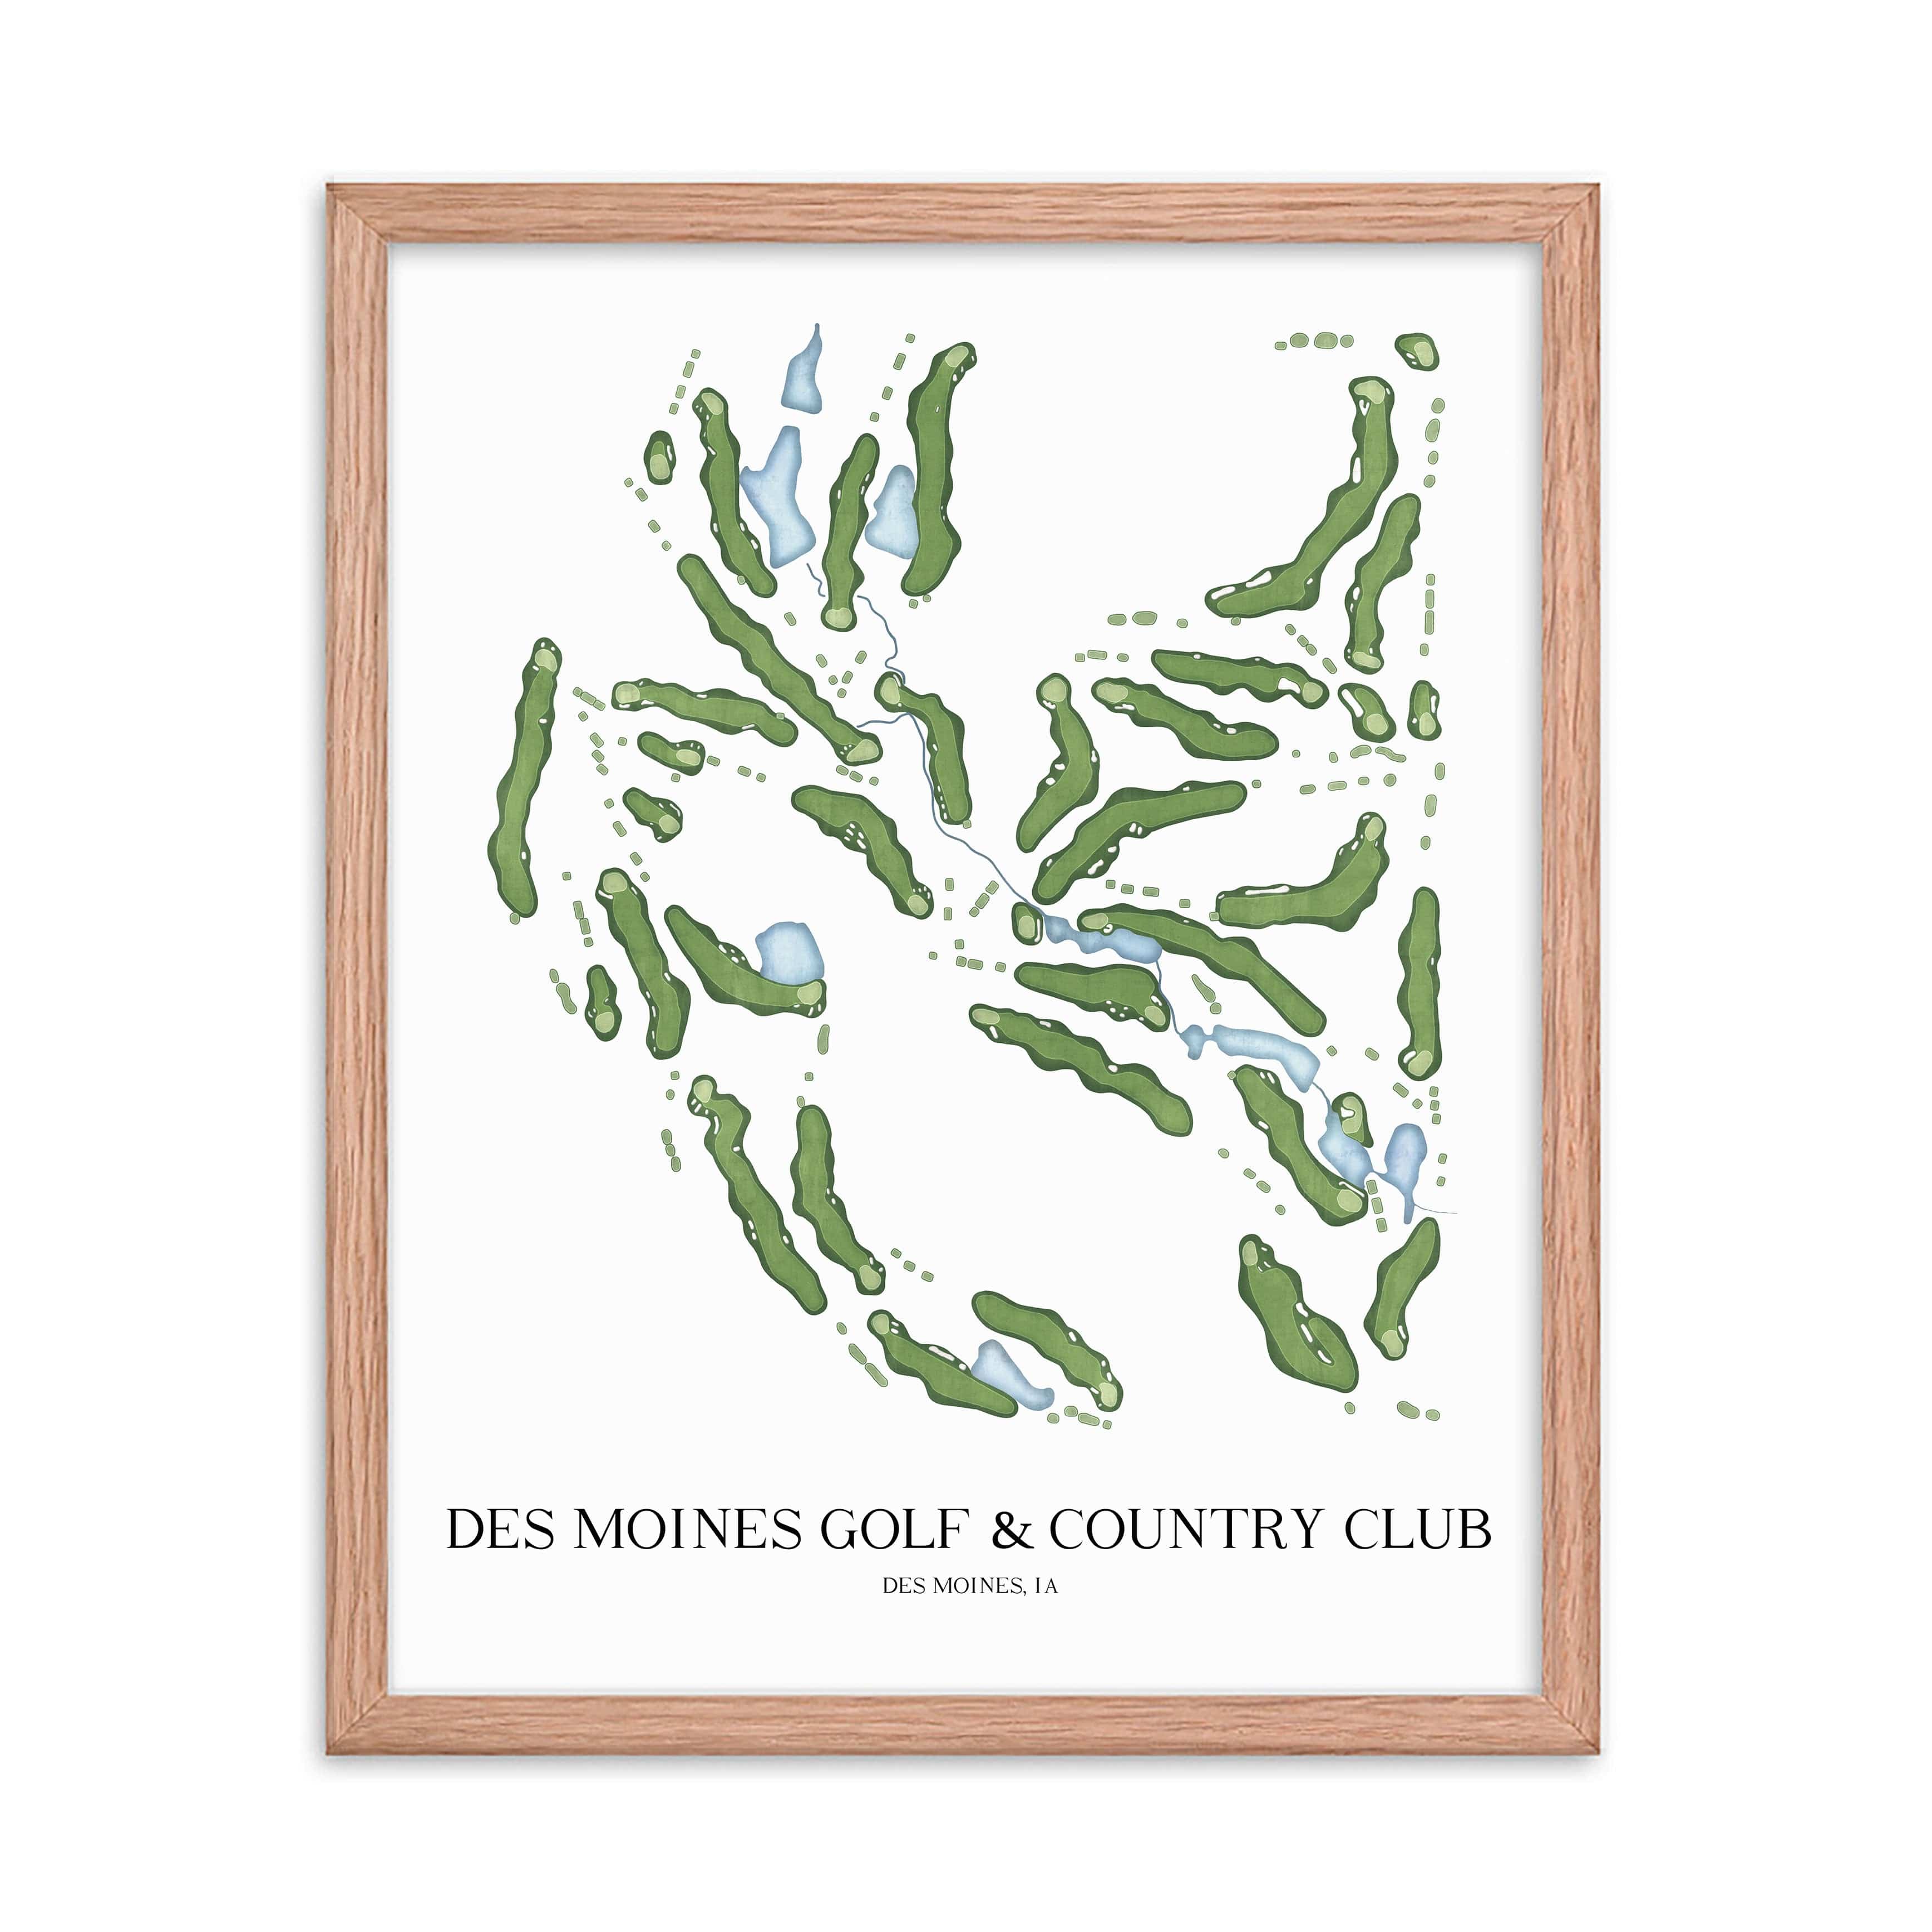 The 19th Hole Golf Shop - Golf Course Prints -  Des Moines Golf and Country Club Golf Course Map